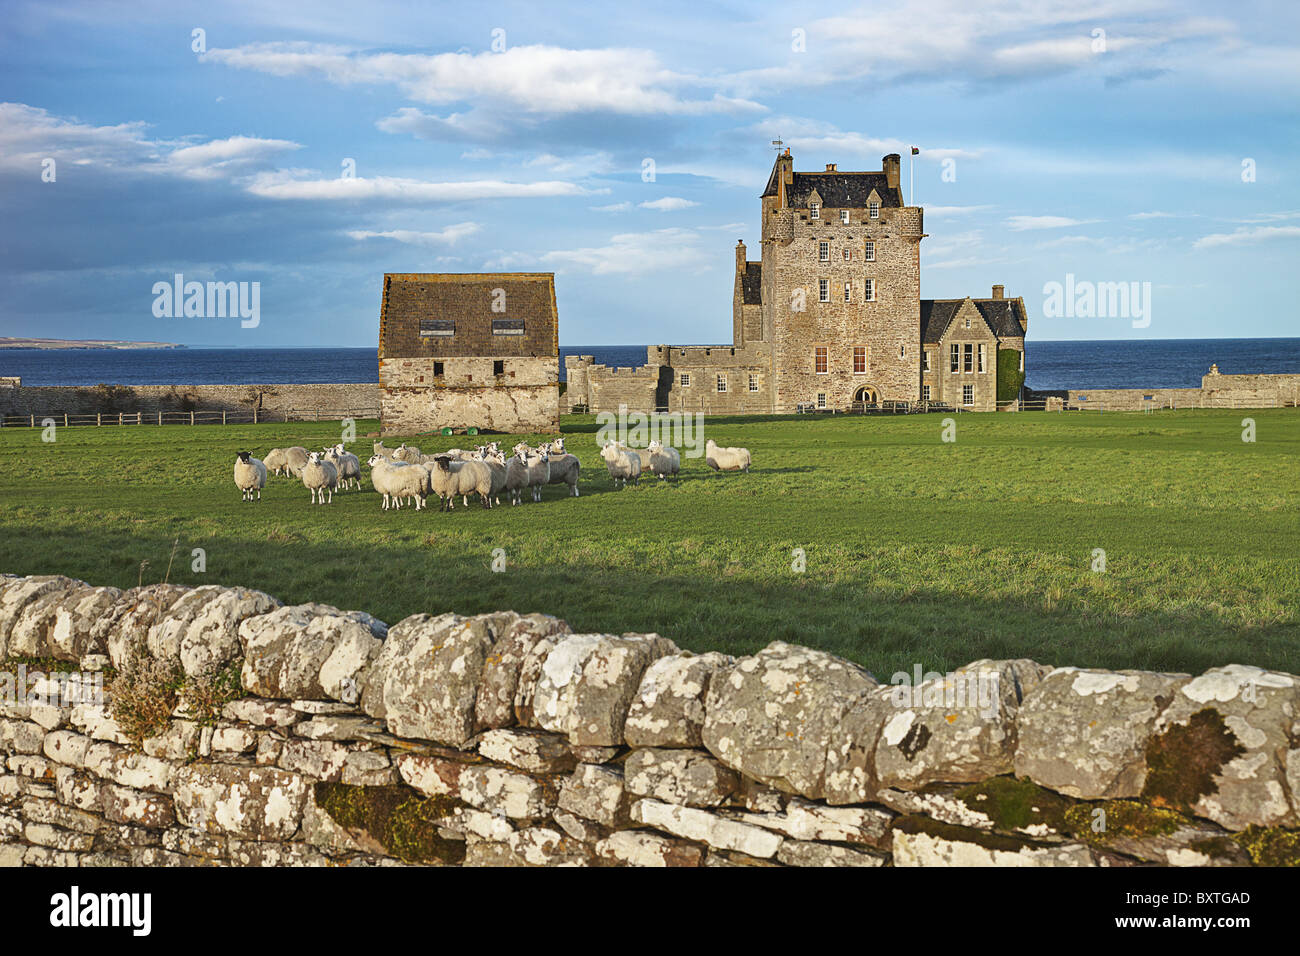 Stone wall and flock of sheep dotting landscape in front of Scottish Castle. Stock Photo